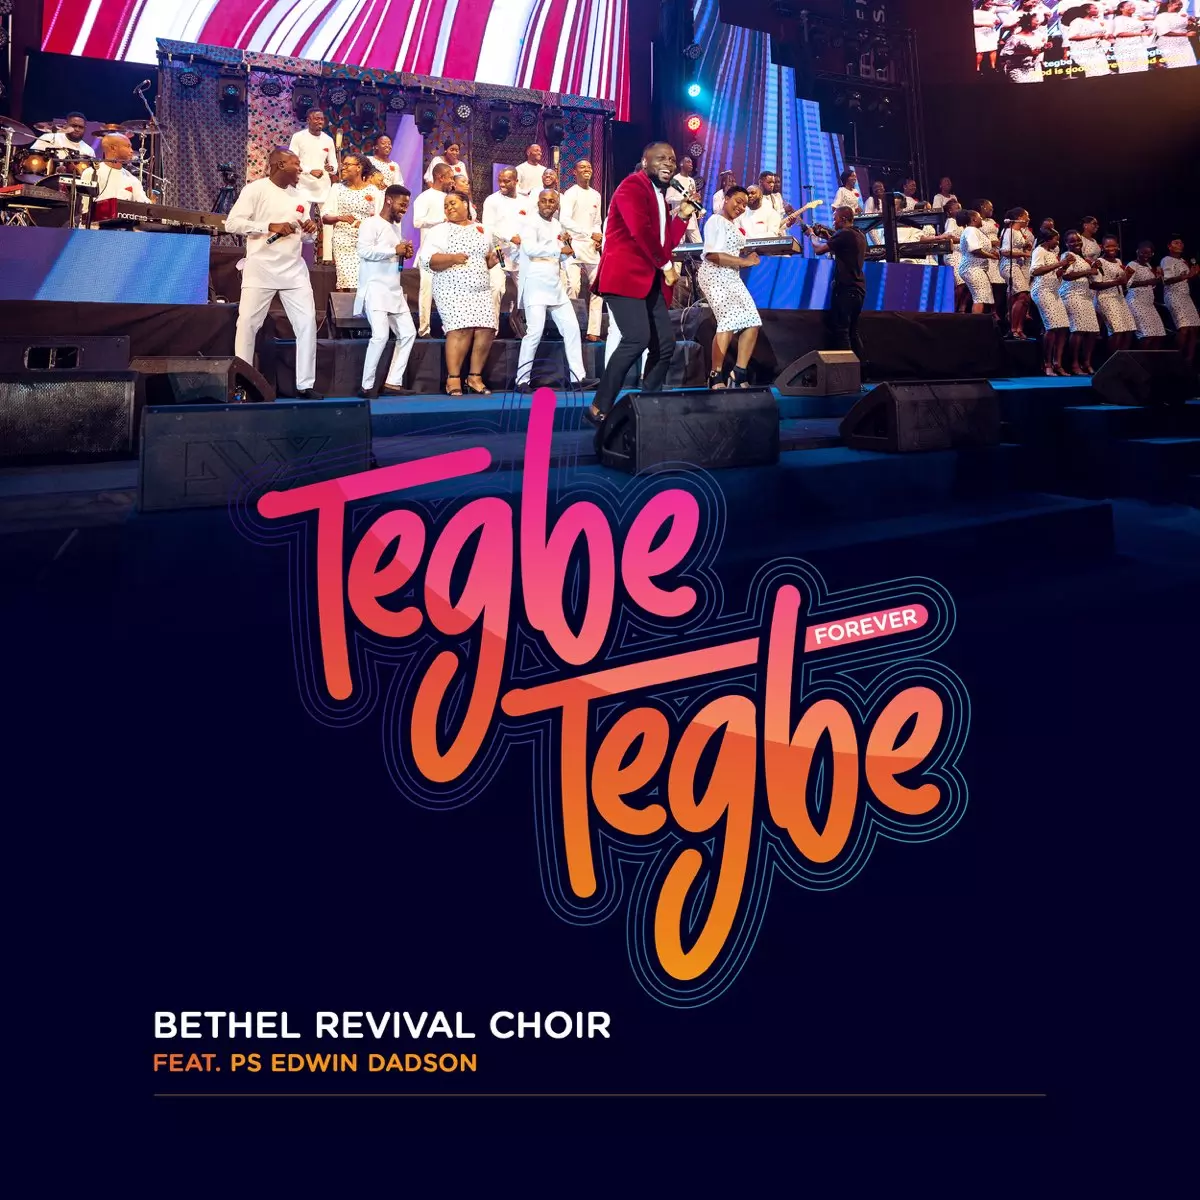 Tegbe Tegbe (Forever) [feat. Ps. Edwin Dadson] - Single by Bethel Revival Choir on Apple Music